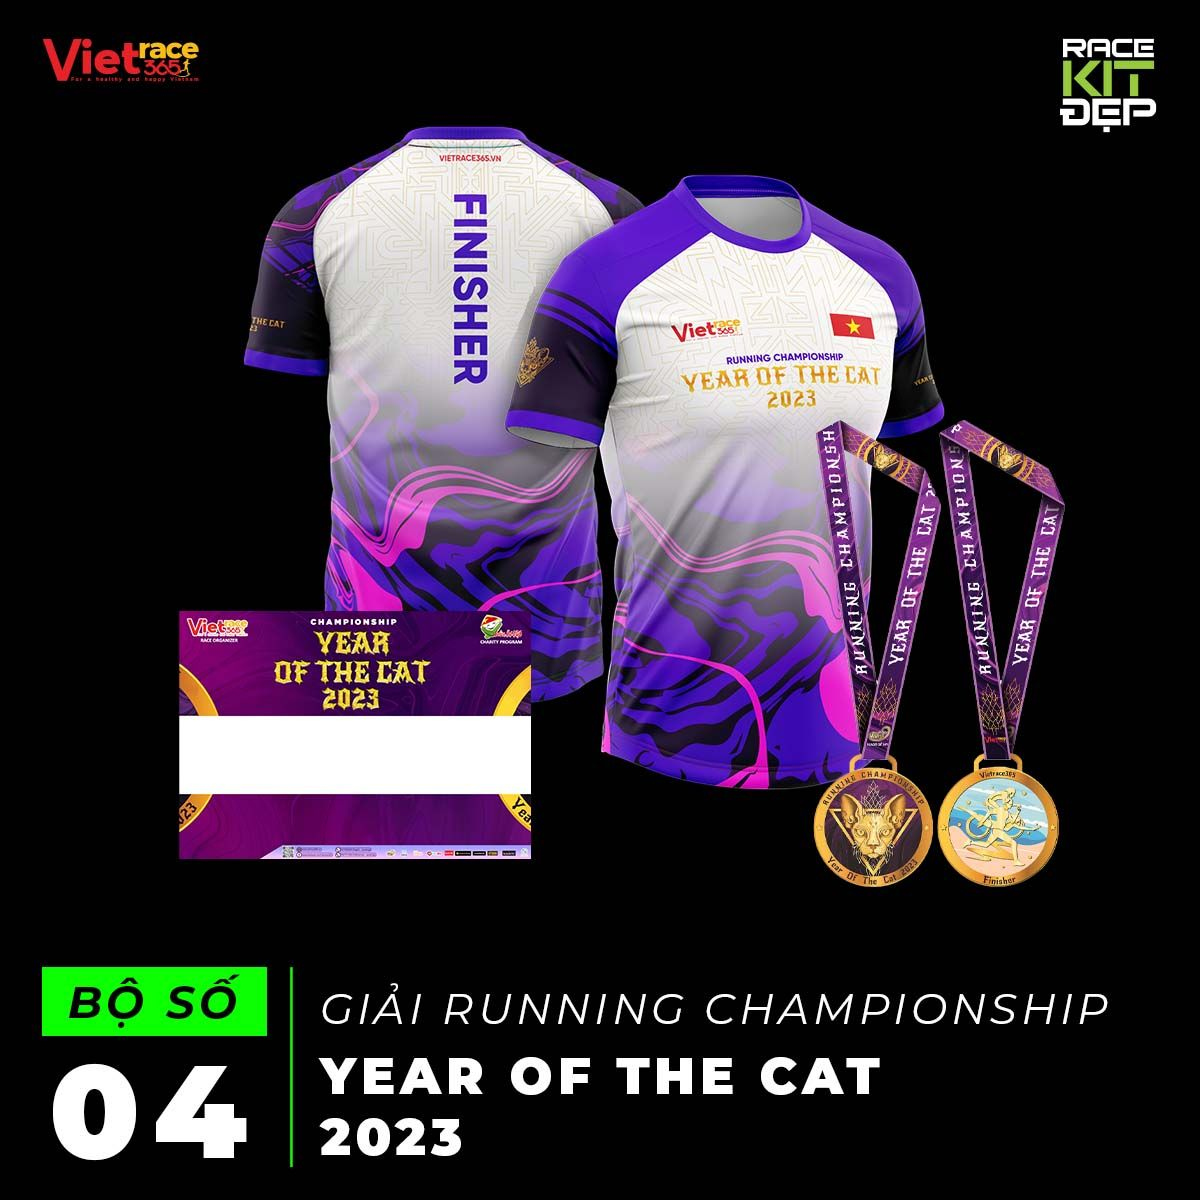 Year of the Cat 2023